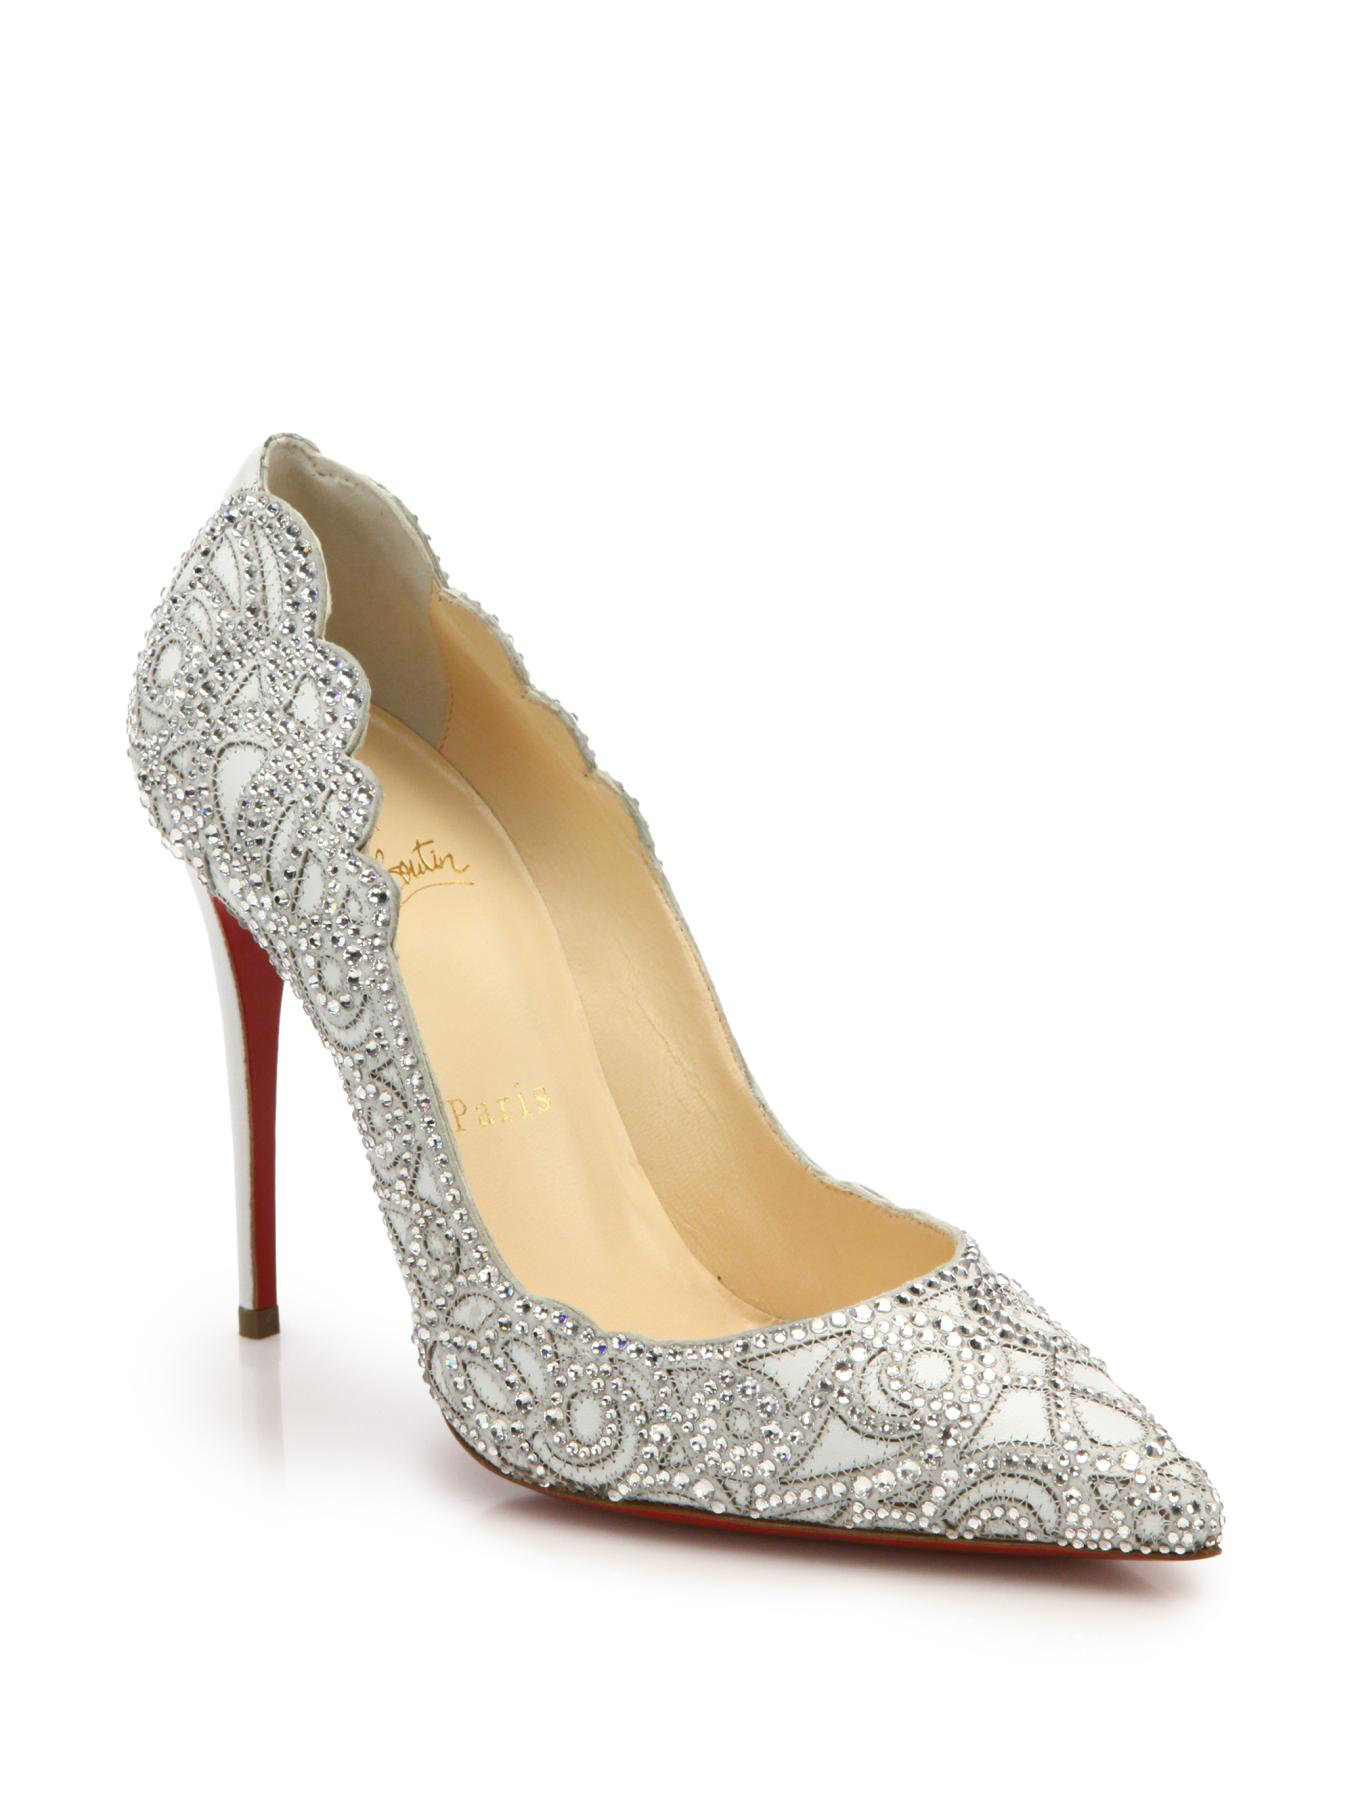 Christian louboutin Top Vague Crystal Leather Pumps in Silver ...  